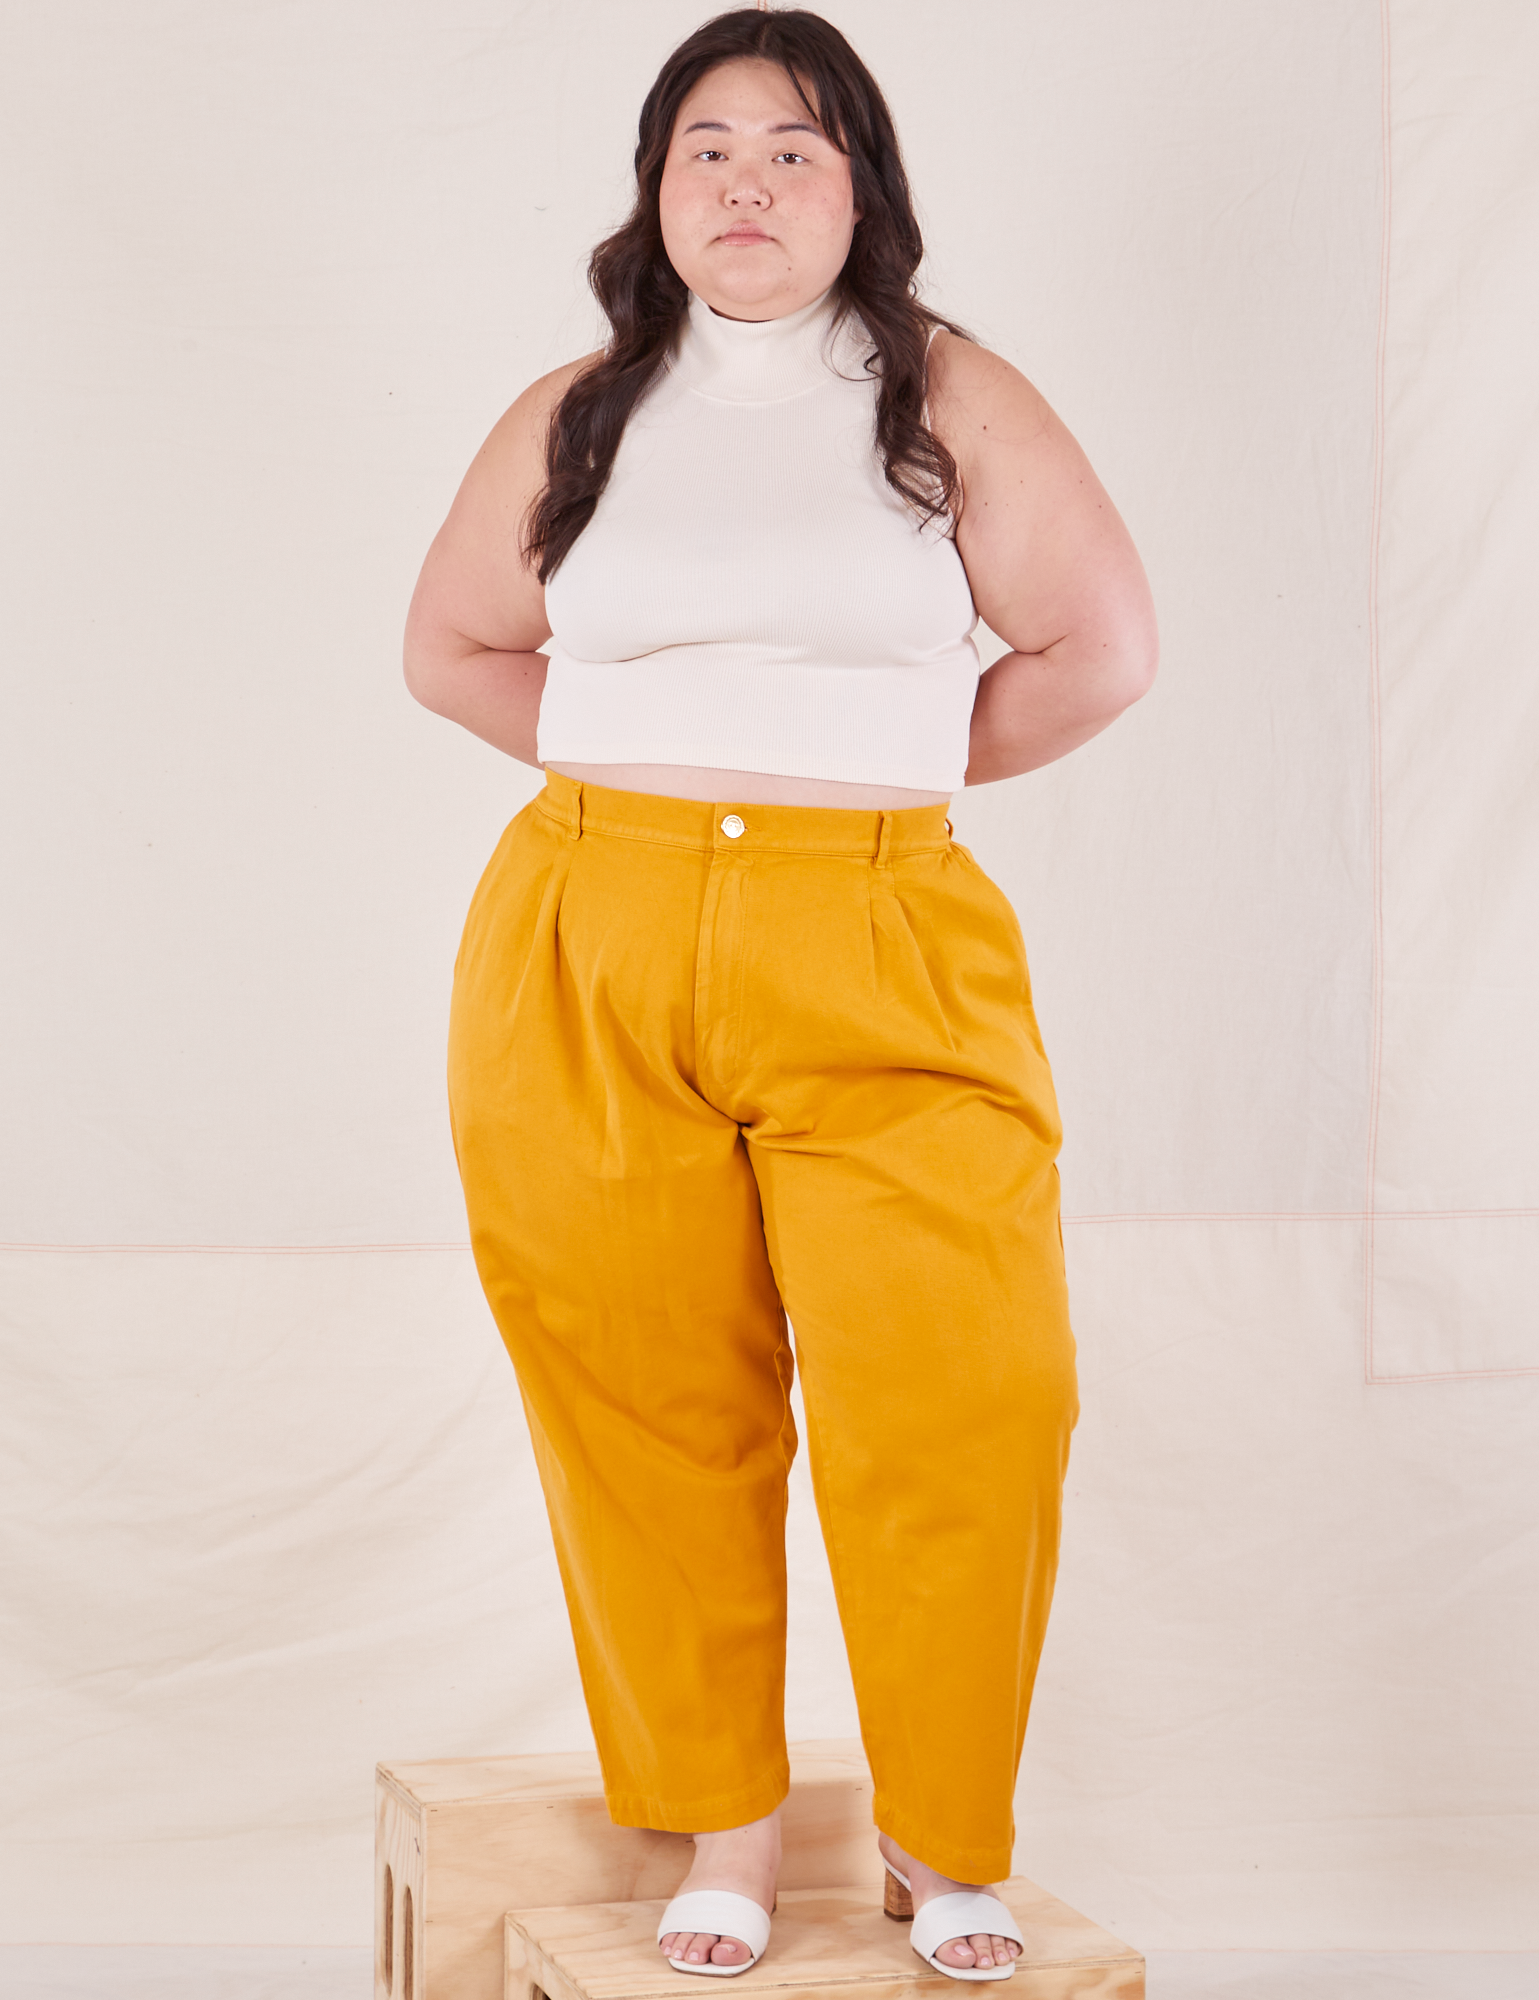 Ashley is 5&#39;7&quot; and wearing 1XL Petite Organic Trousers in Mustard Yellow paired with vintage off-white Sleeveless Essential Turtleneck